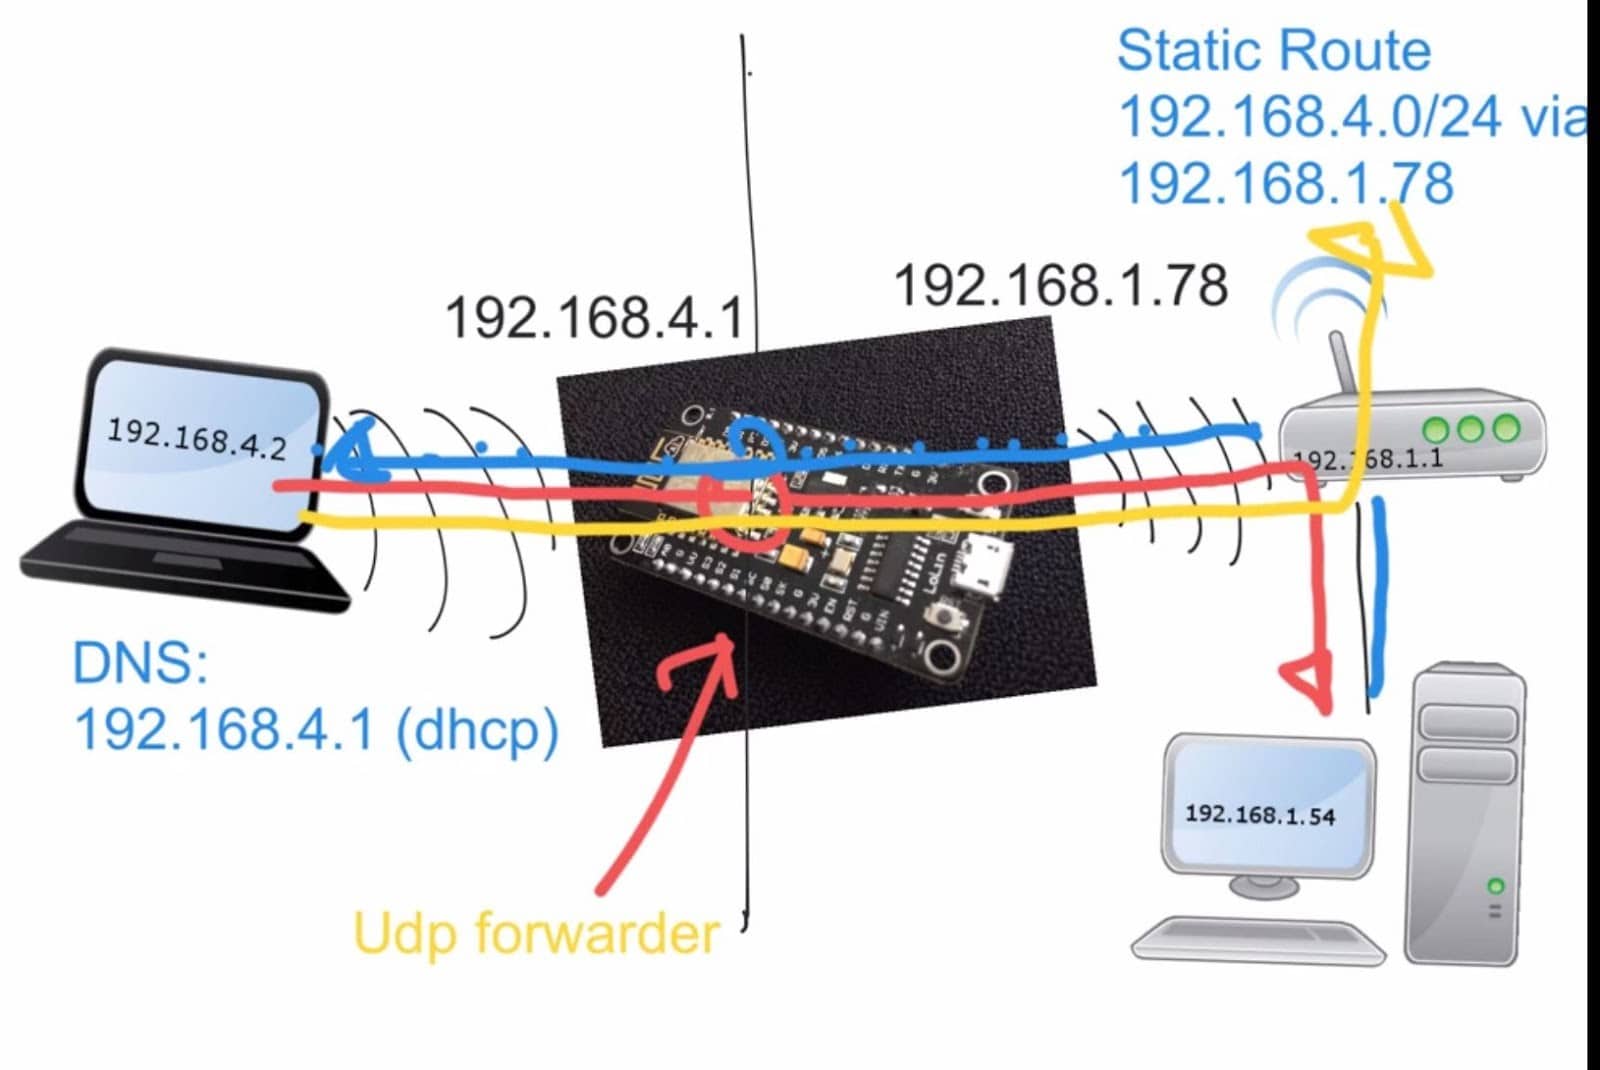 How to Build WIFI Repeater/Extender with ESP8266 Node MCU